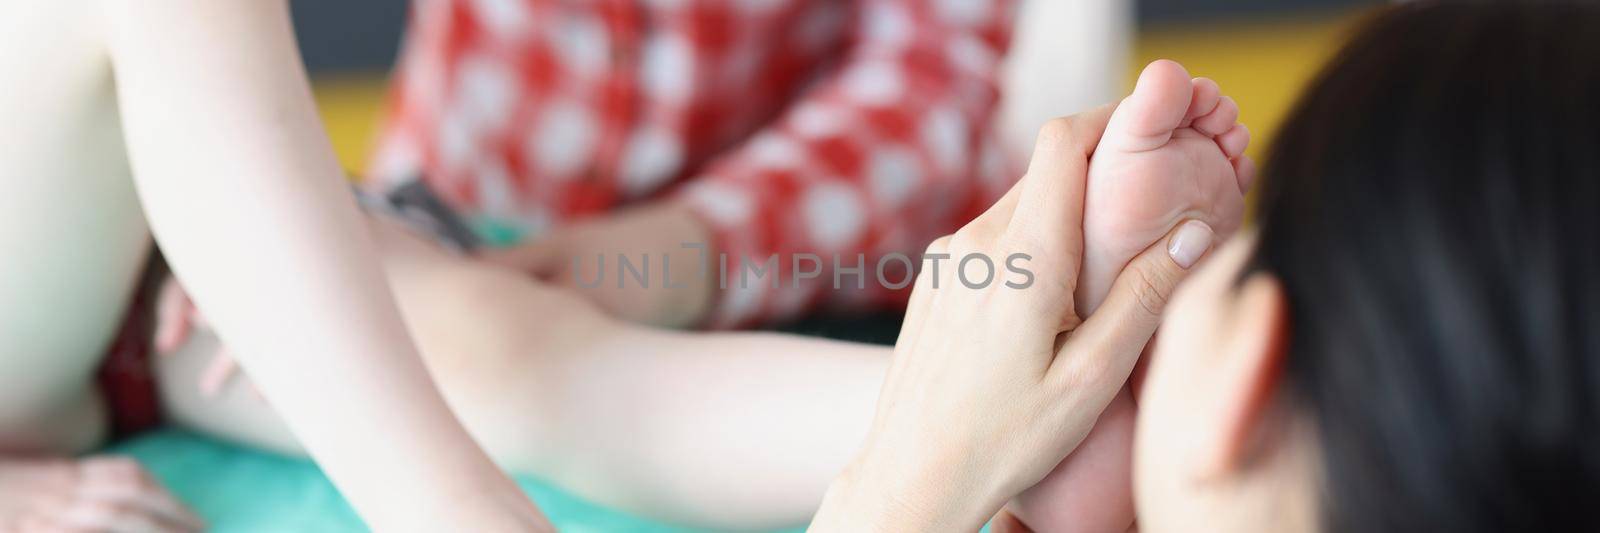 Close-up of woman physiotherapist massaging childs feet on appointment in clinic. Leg damage after injury or accident. Healthcare, medicine, care concept